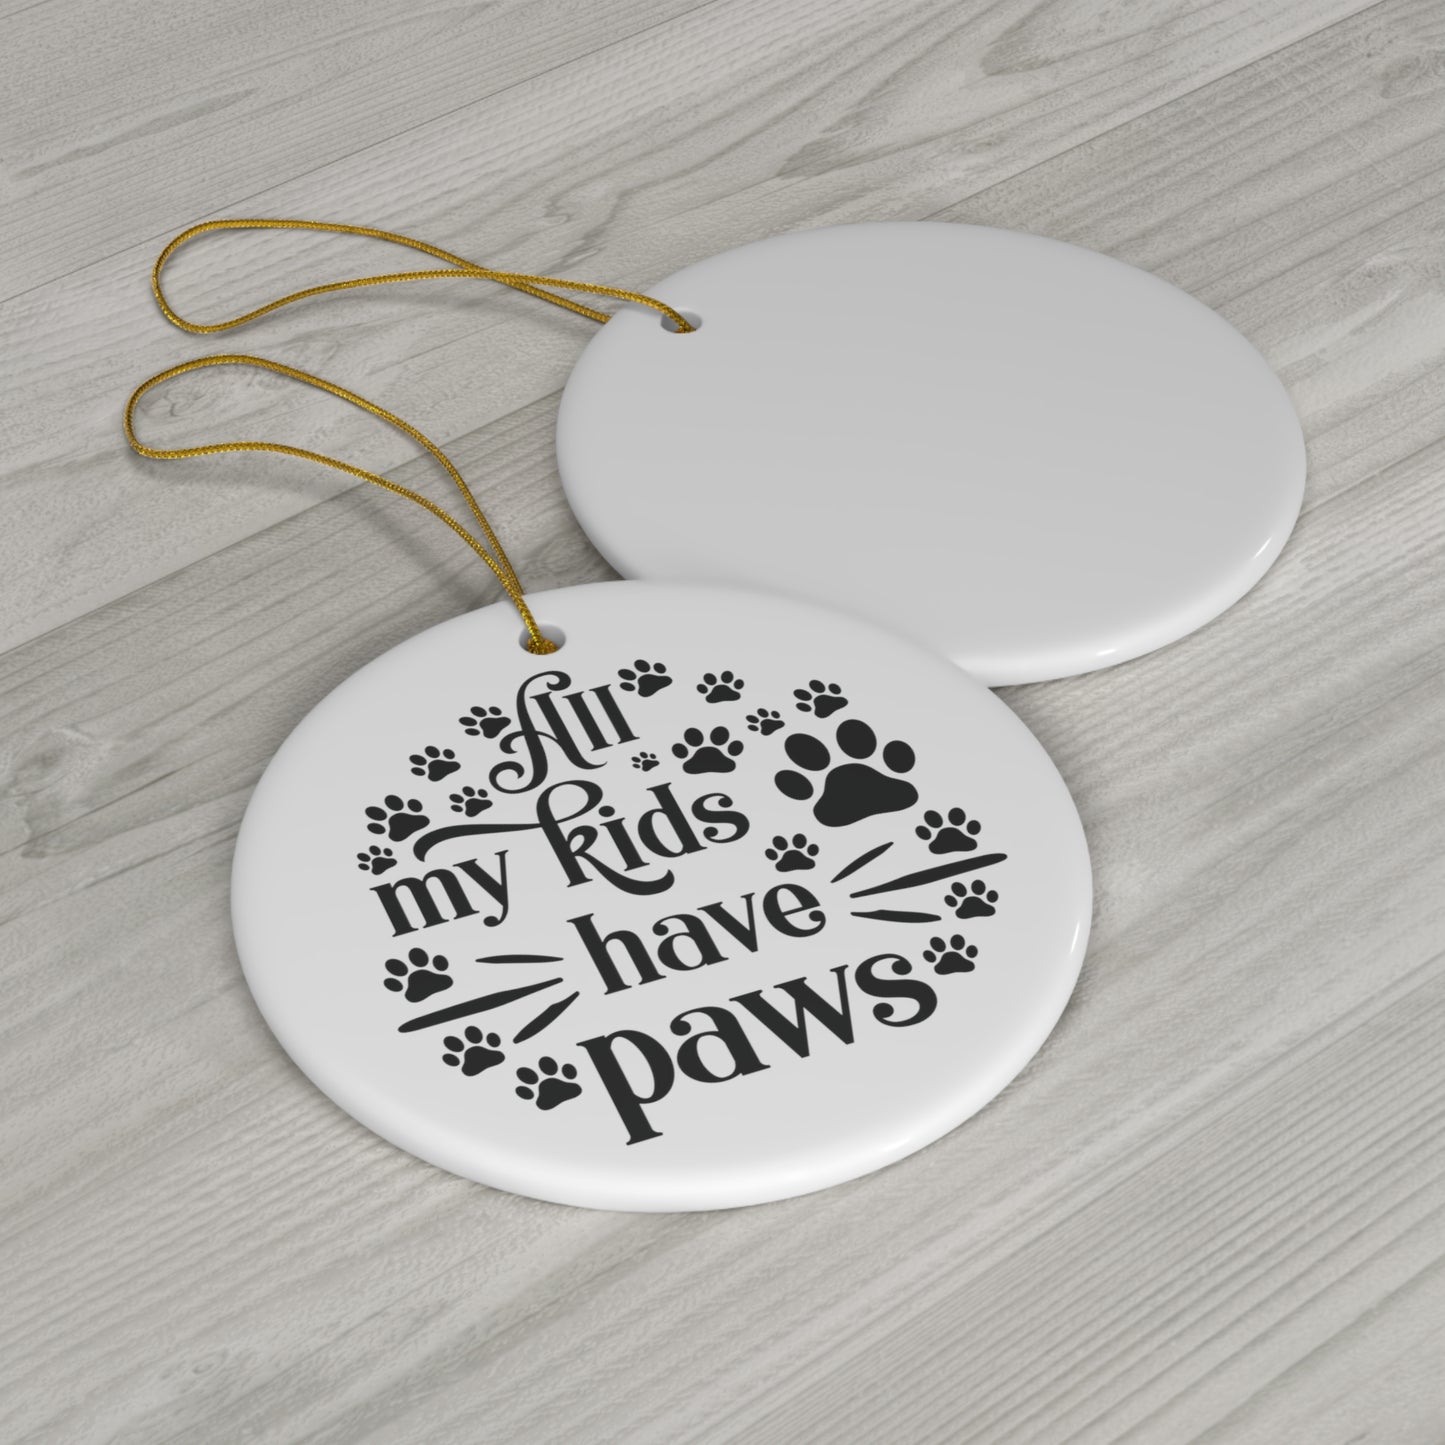 All My Kids Have Paws Ornament